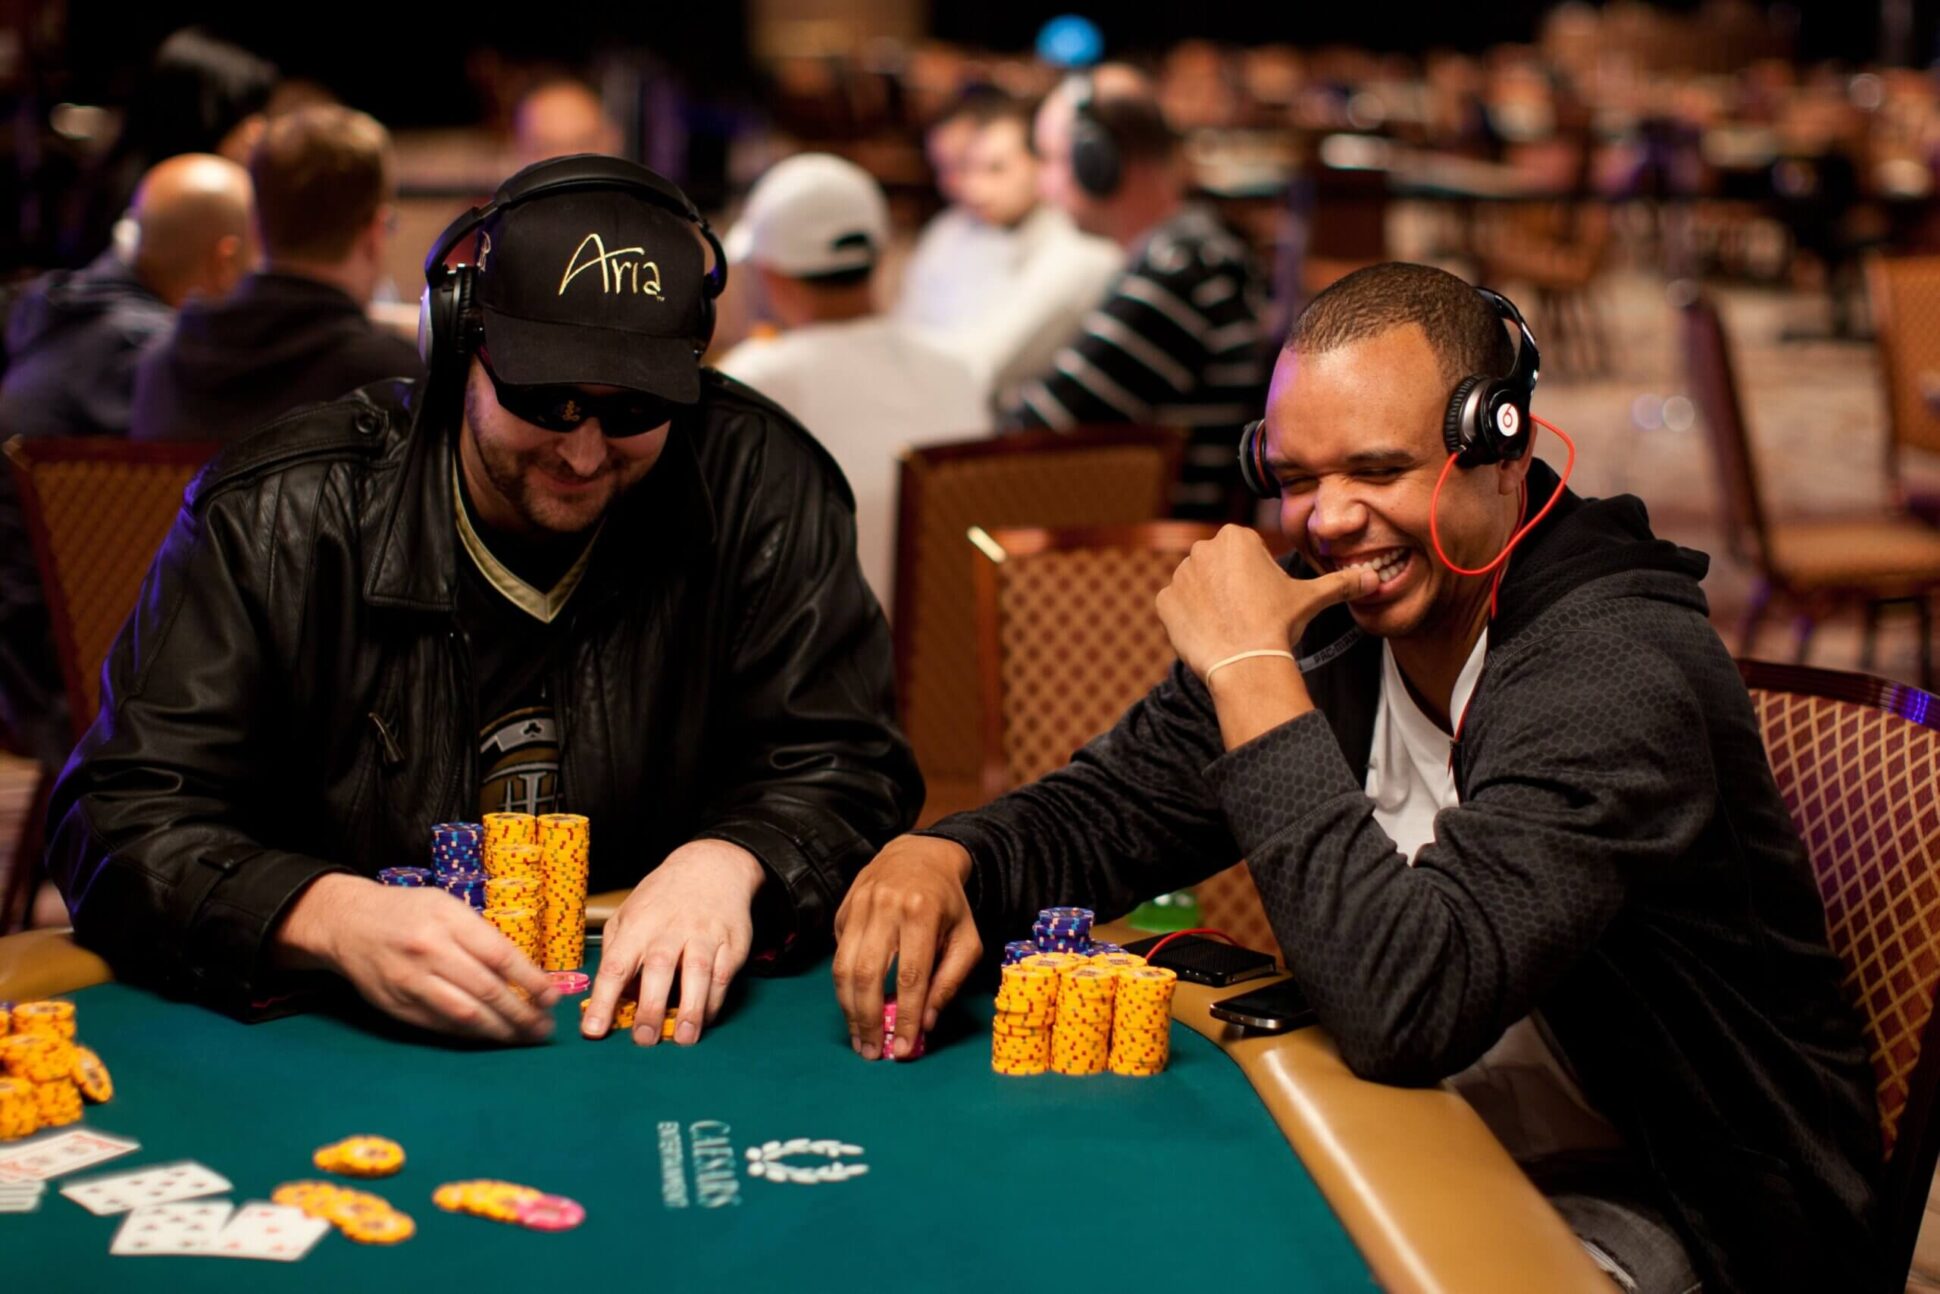 2023 WSOP Update - Phil Ivey Chip Leader After Day 3 Of The $50,000 Poker Players Championship (2)